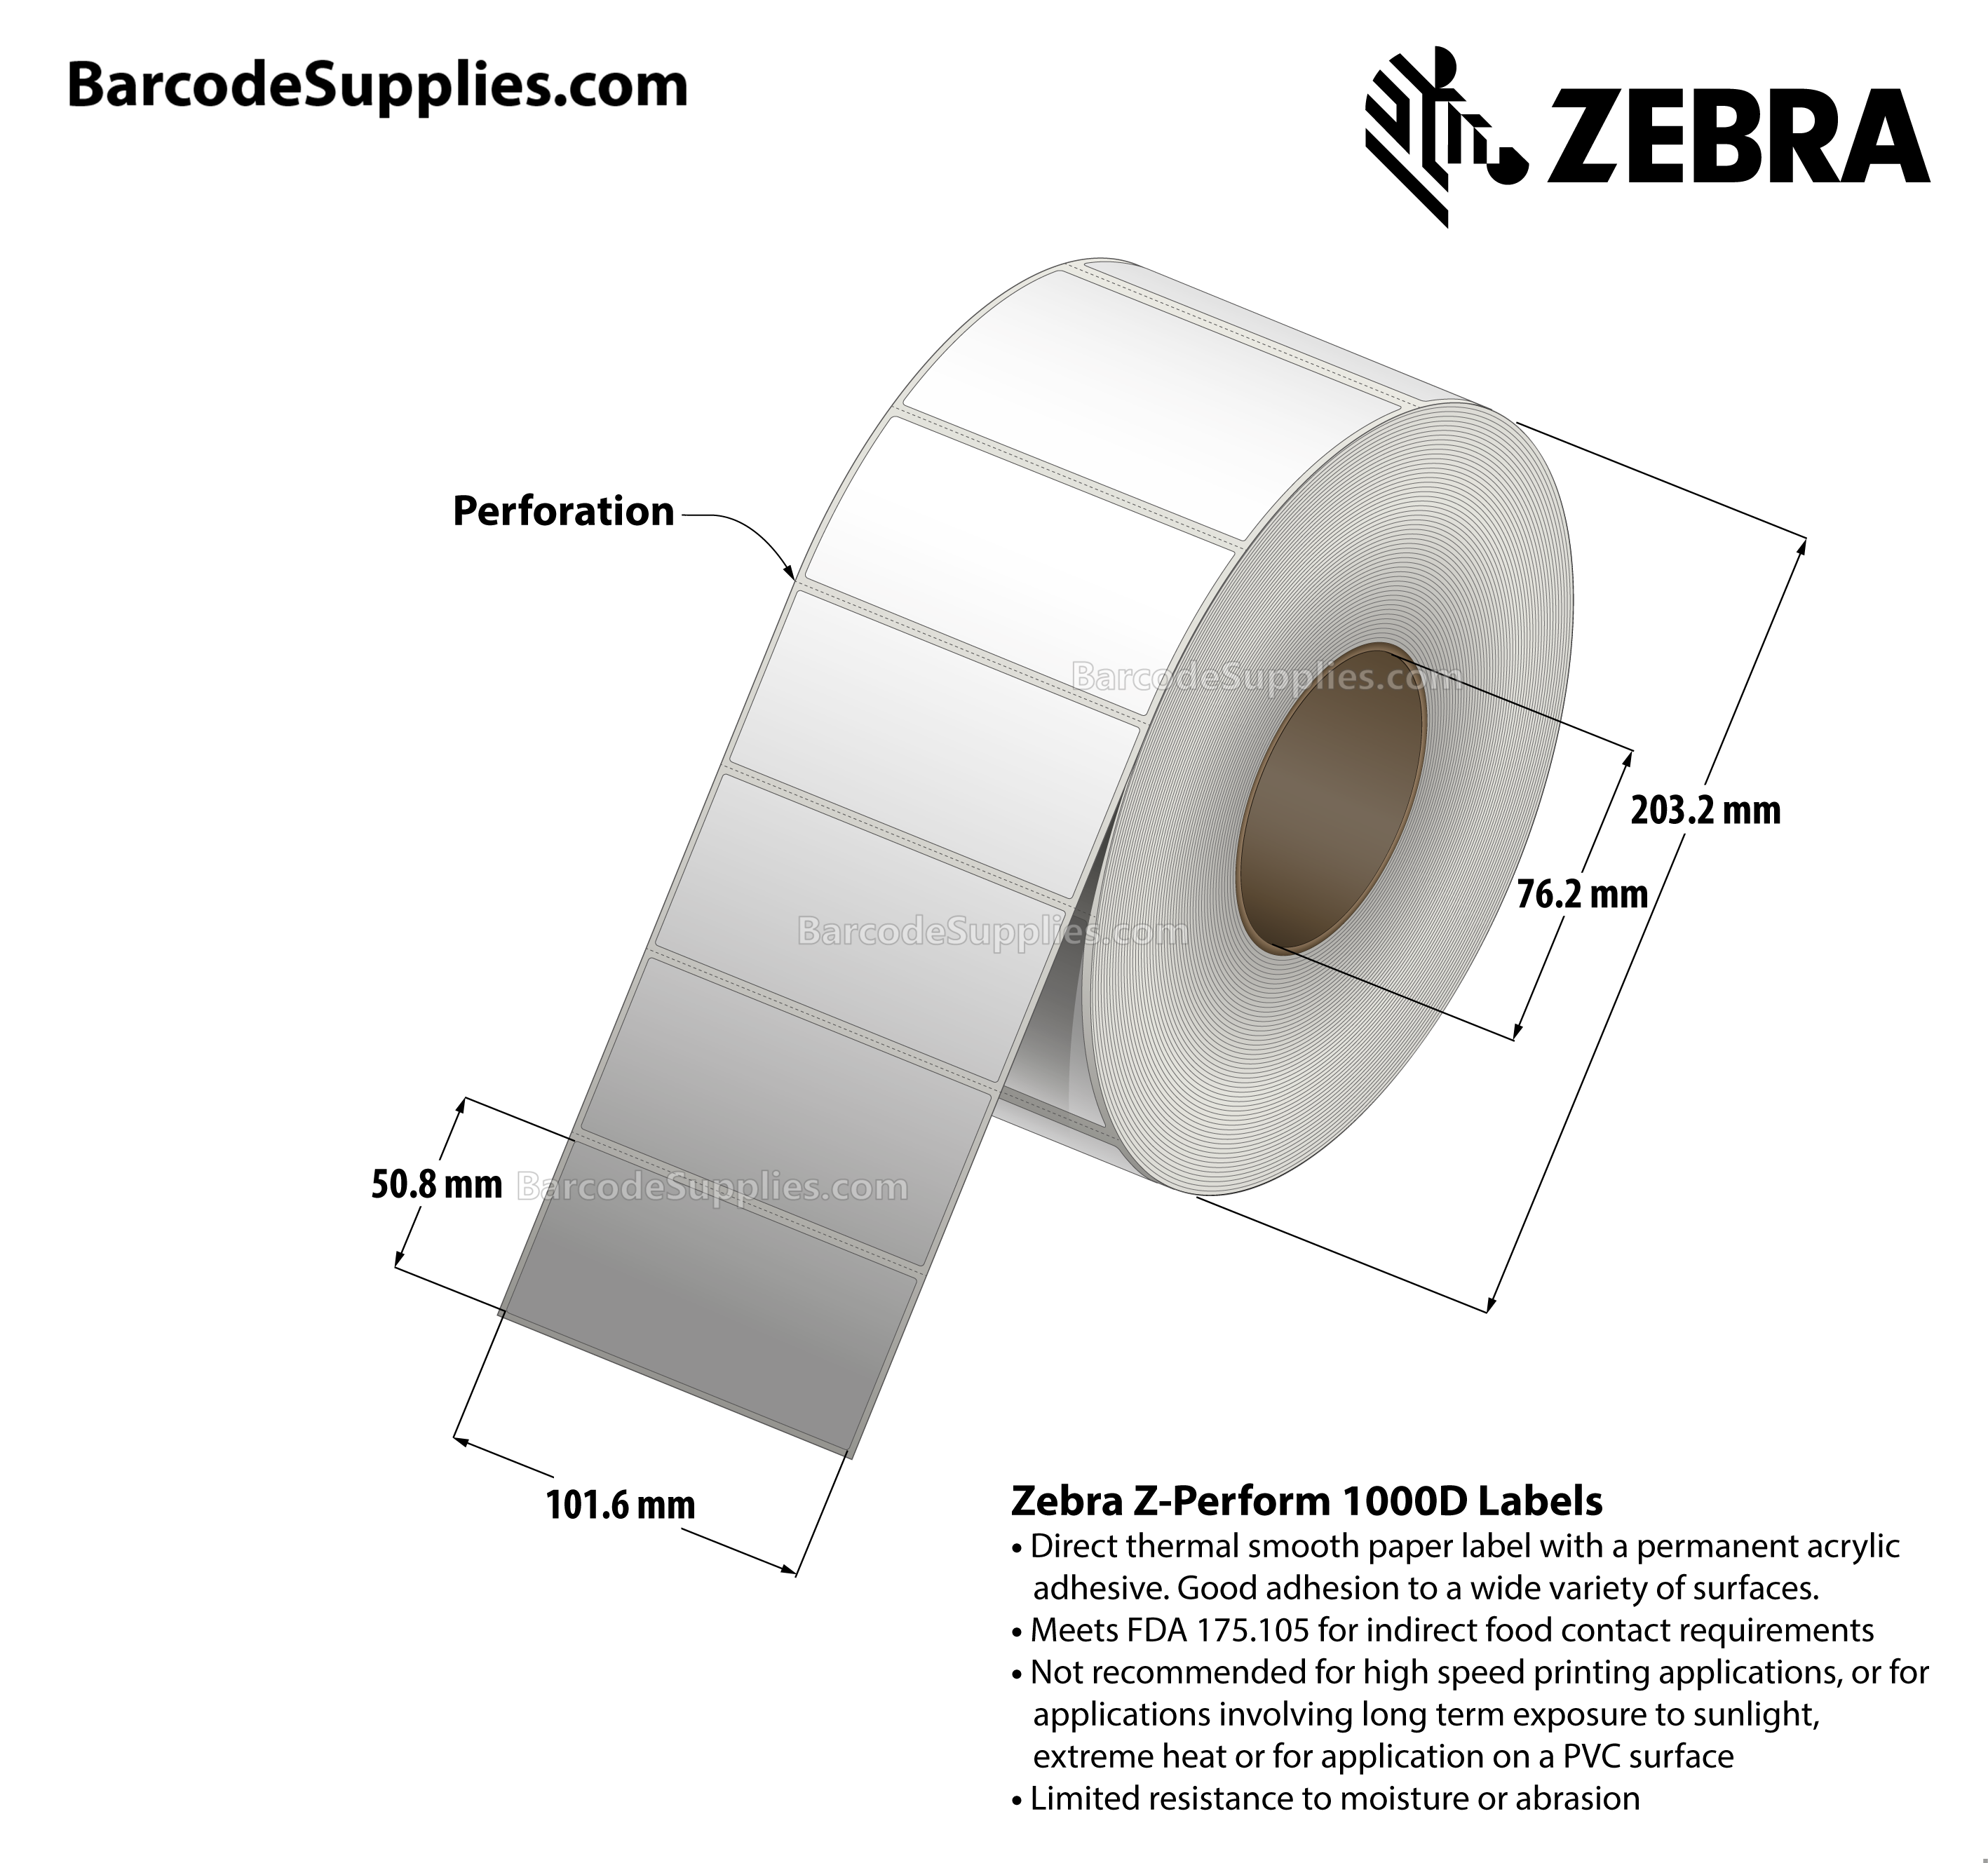 4 x 2 Direct Thermal White Z-Perform 1000D Labels With Permanent Adhesive - Perforated - 2760 Labels Per Roll - Carton Of 4 Rolls - 11040 Labels Total - MPN: 10003051